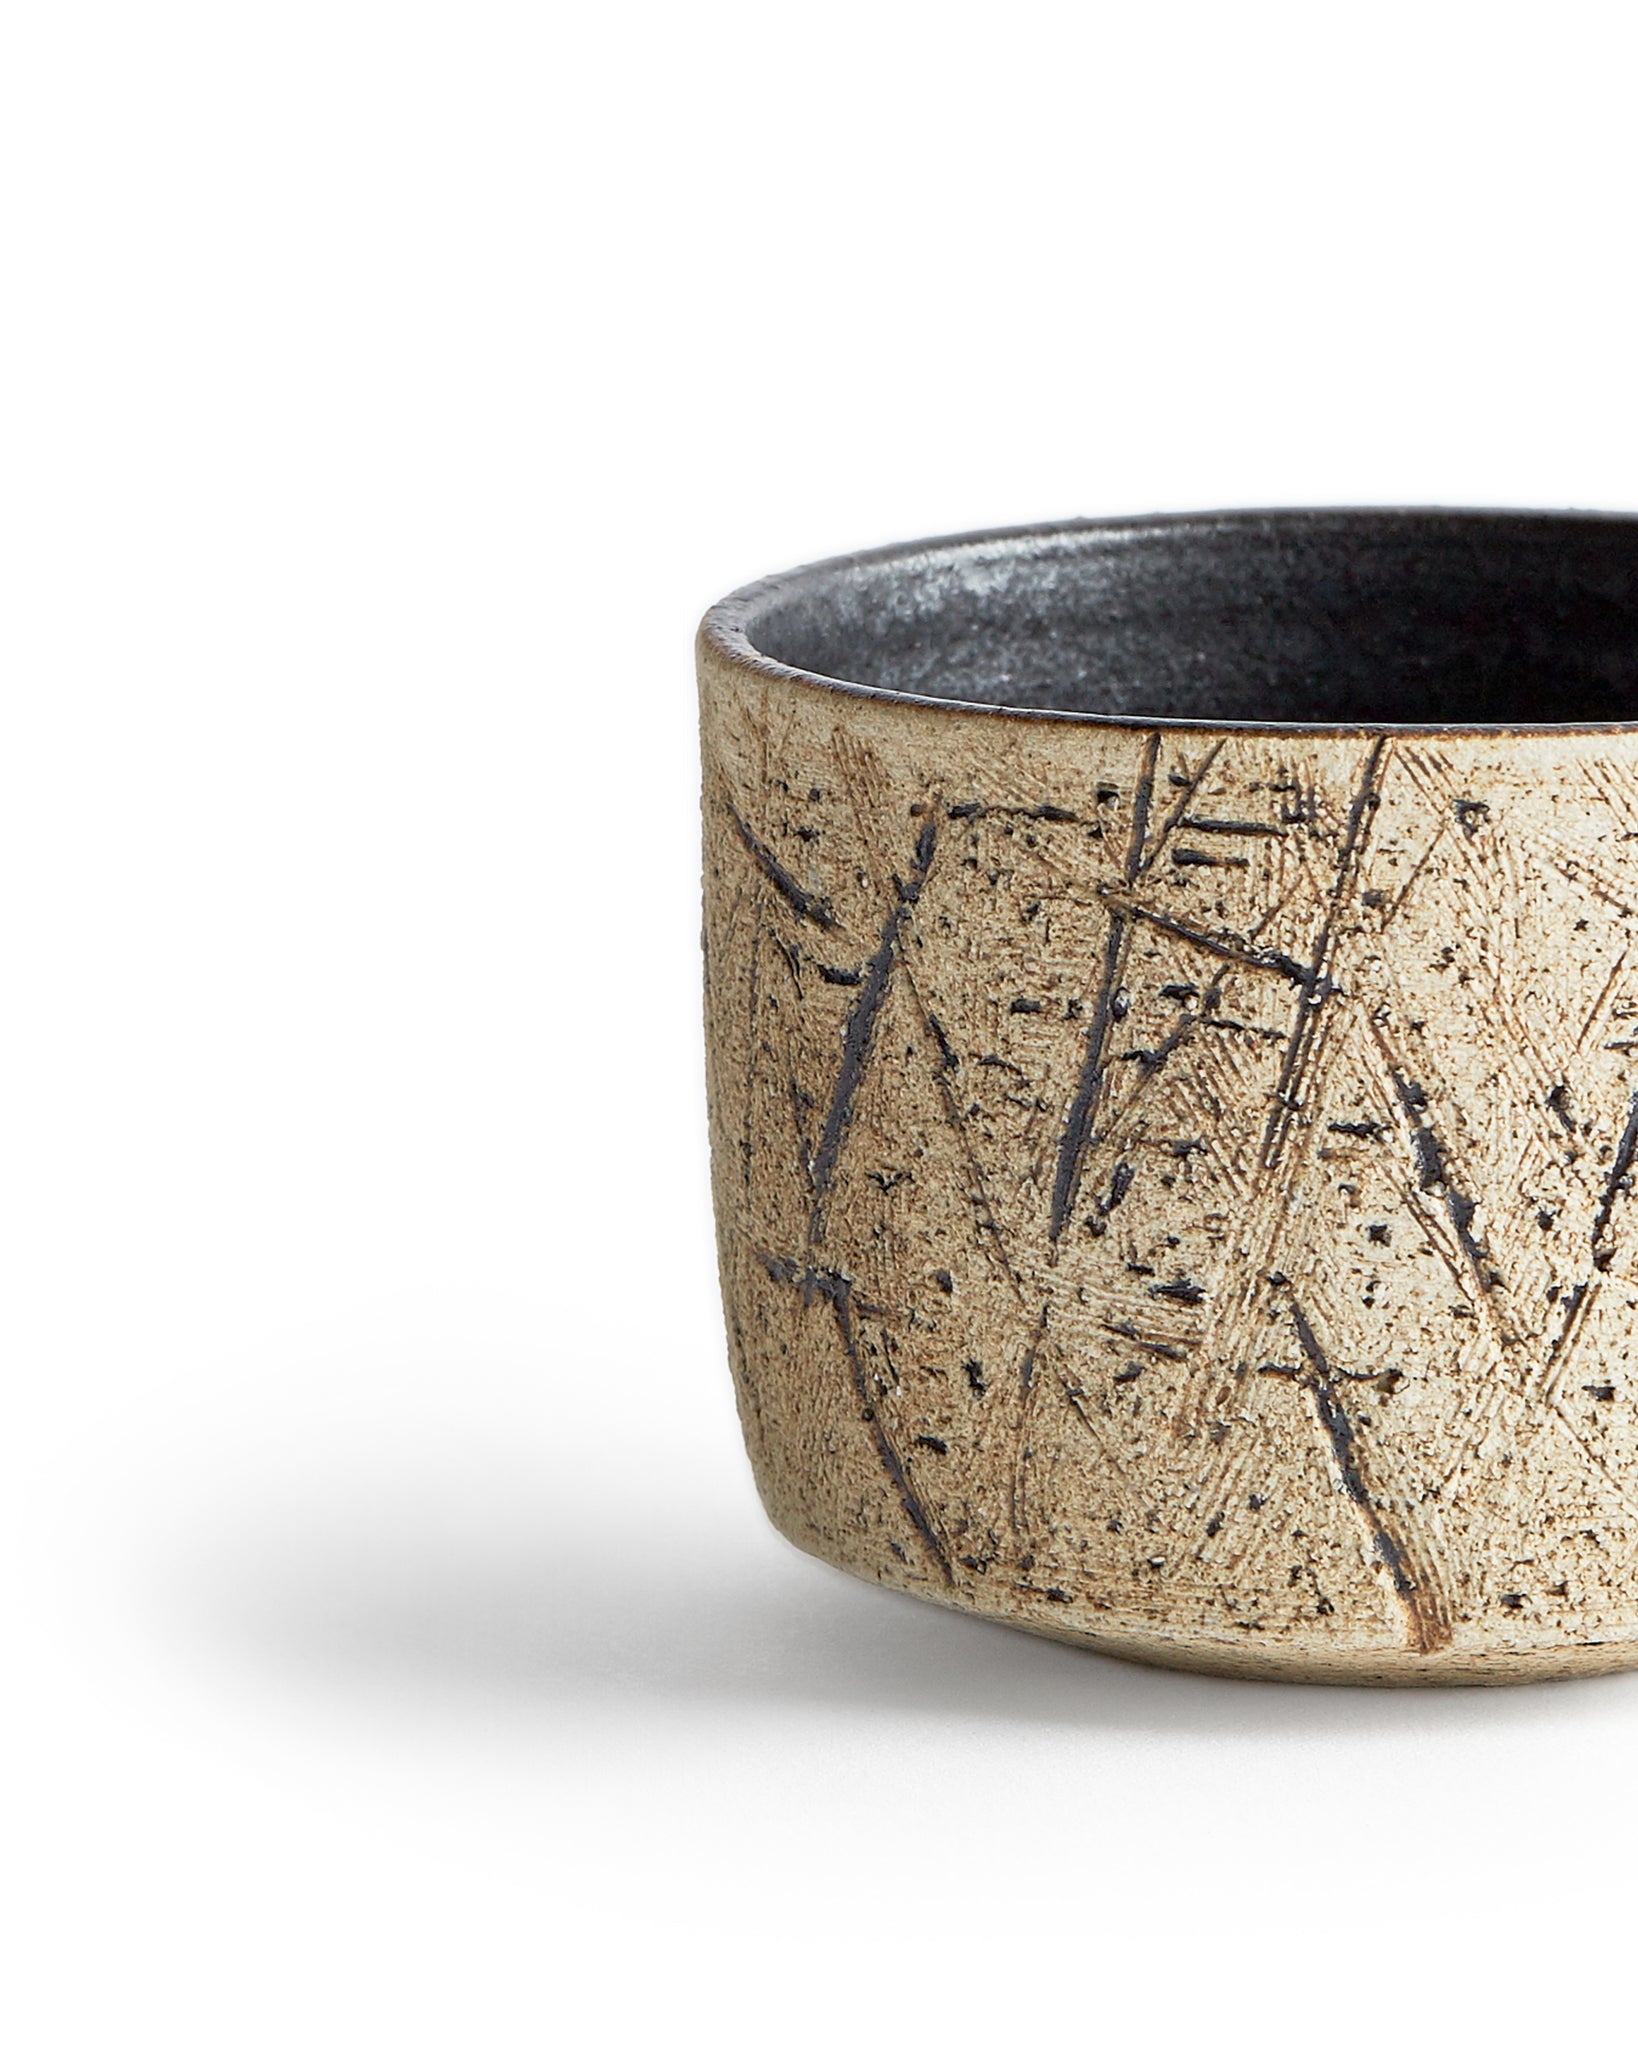 Detailed image of the silhouetted kuro black matcha bowl showing its textures on the exterior..